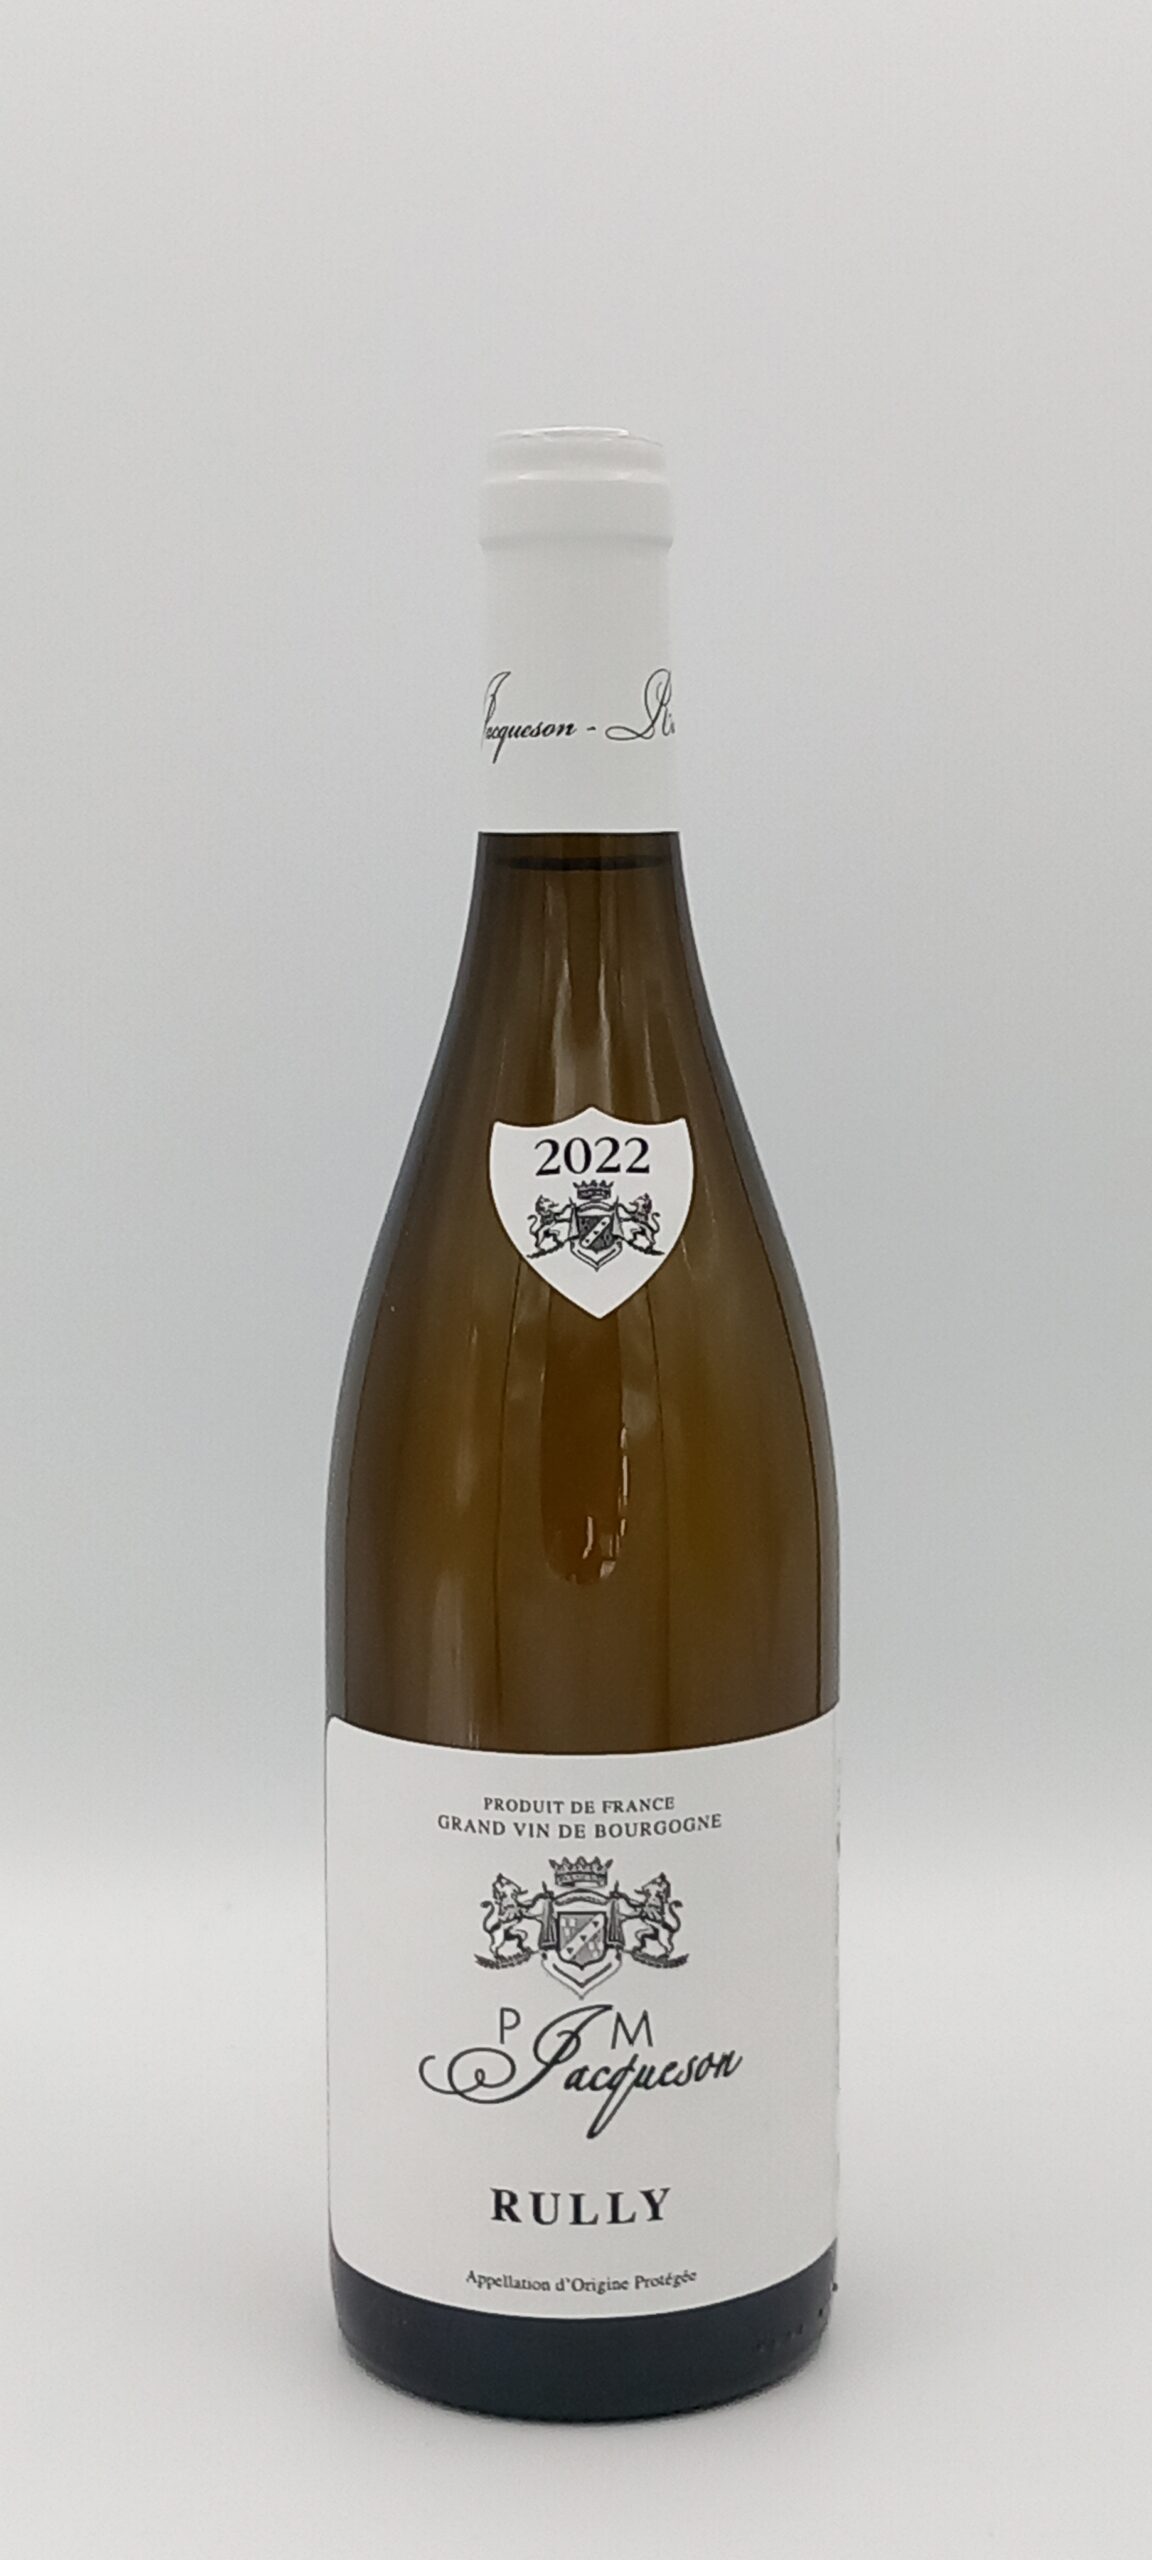 BOURGOGNE RULLY 2022 BLANC JACQUESON